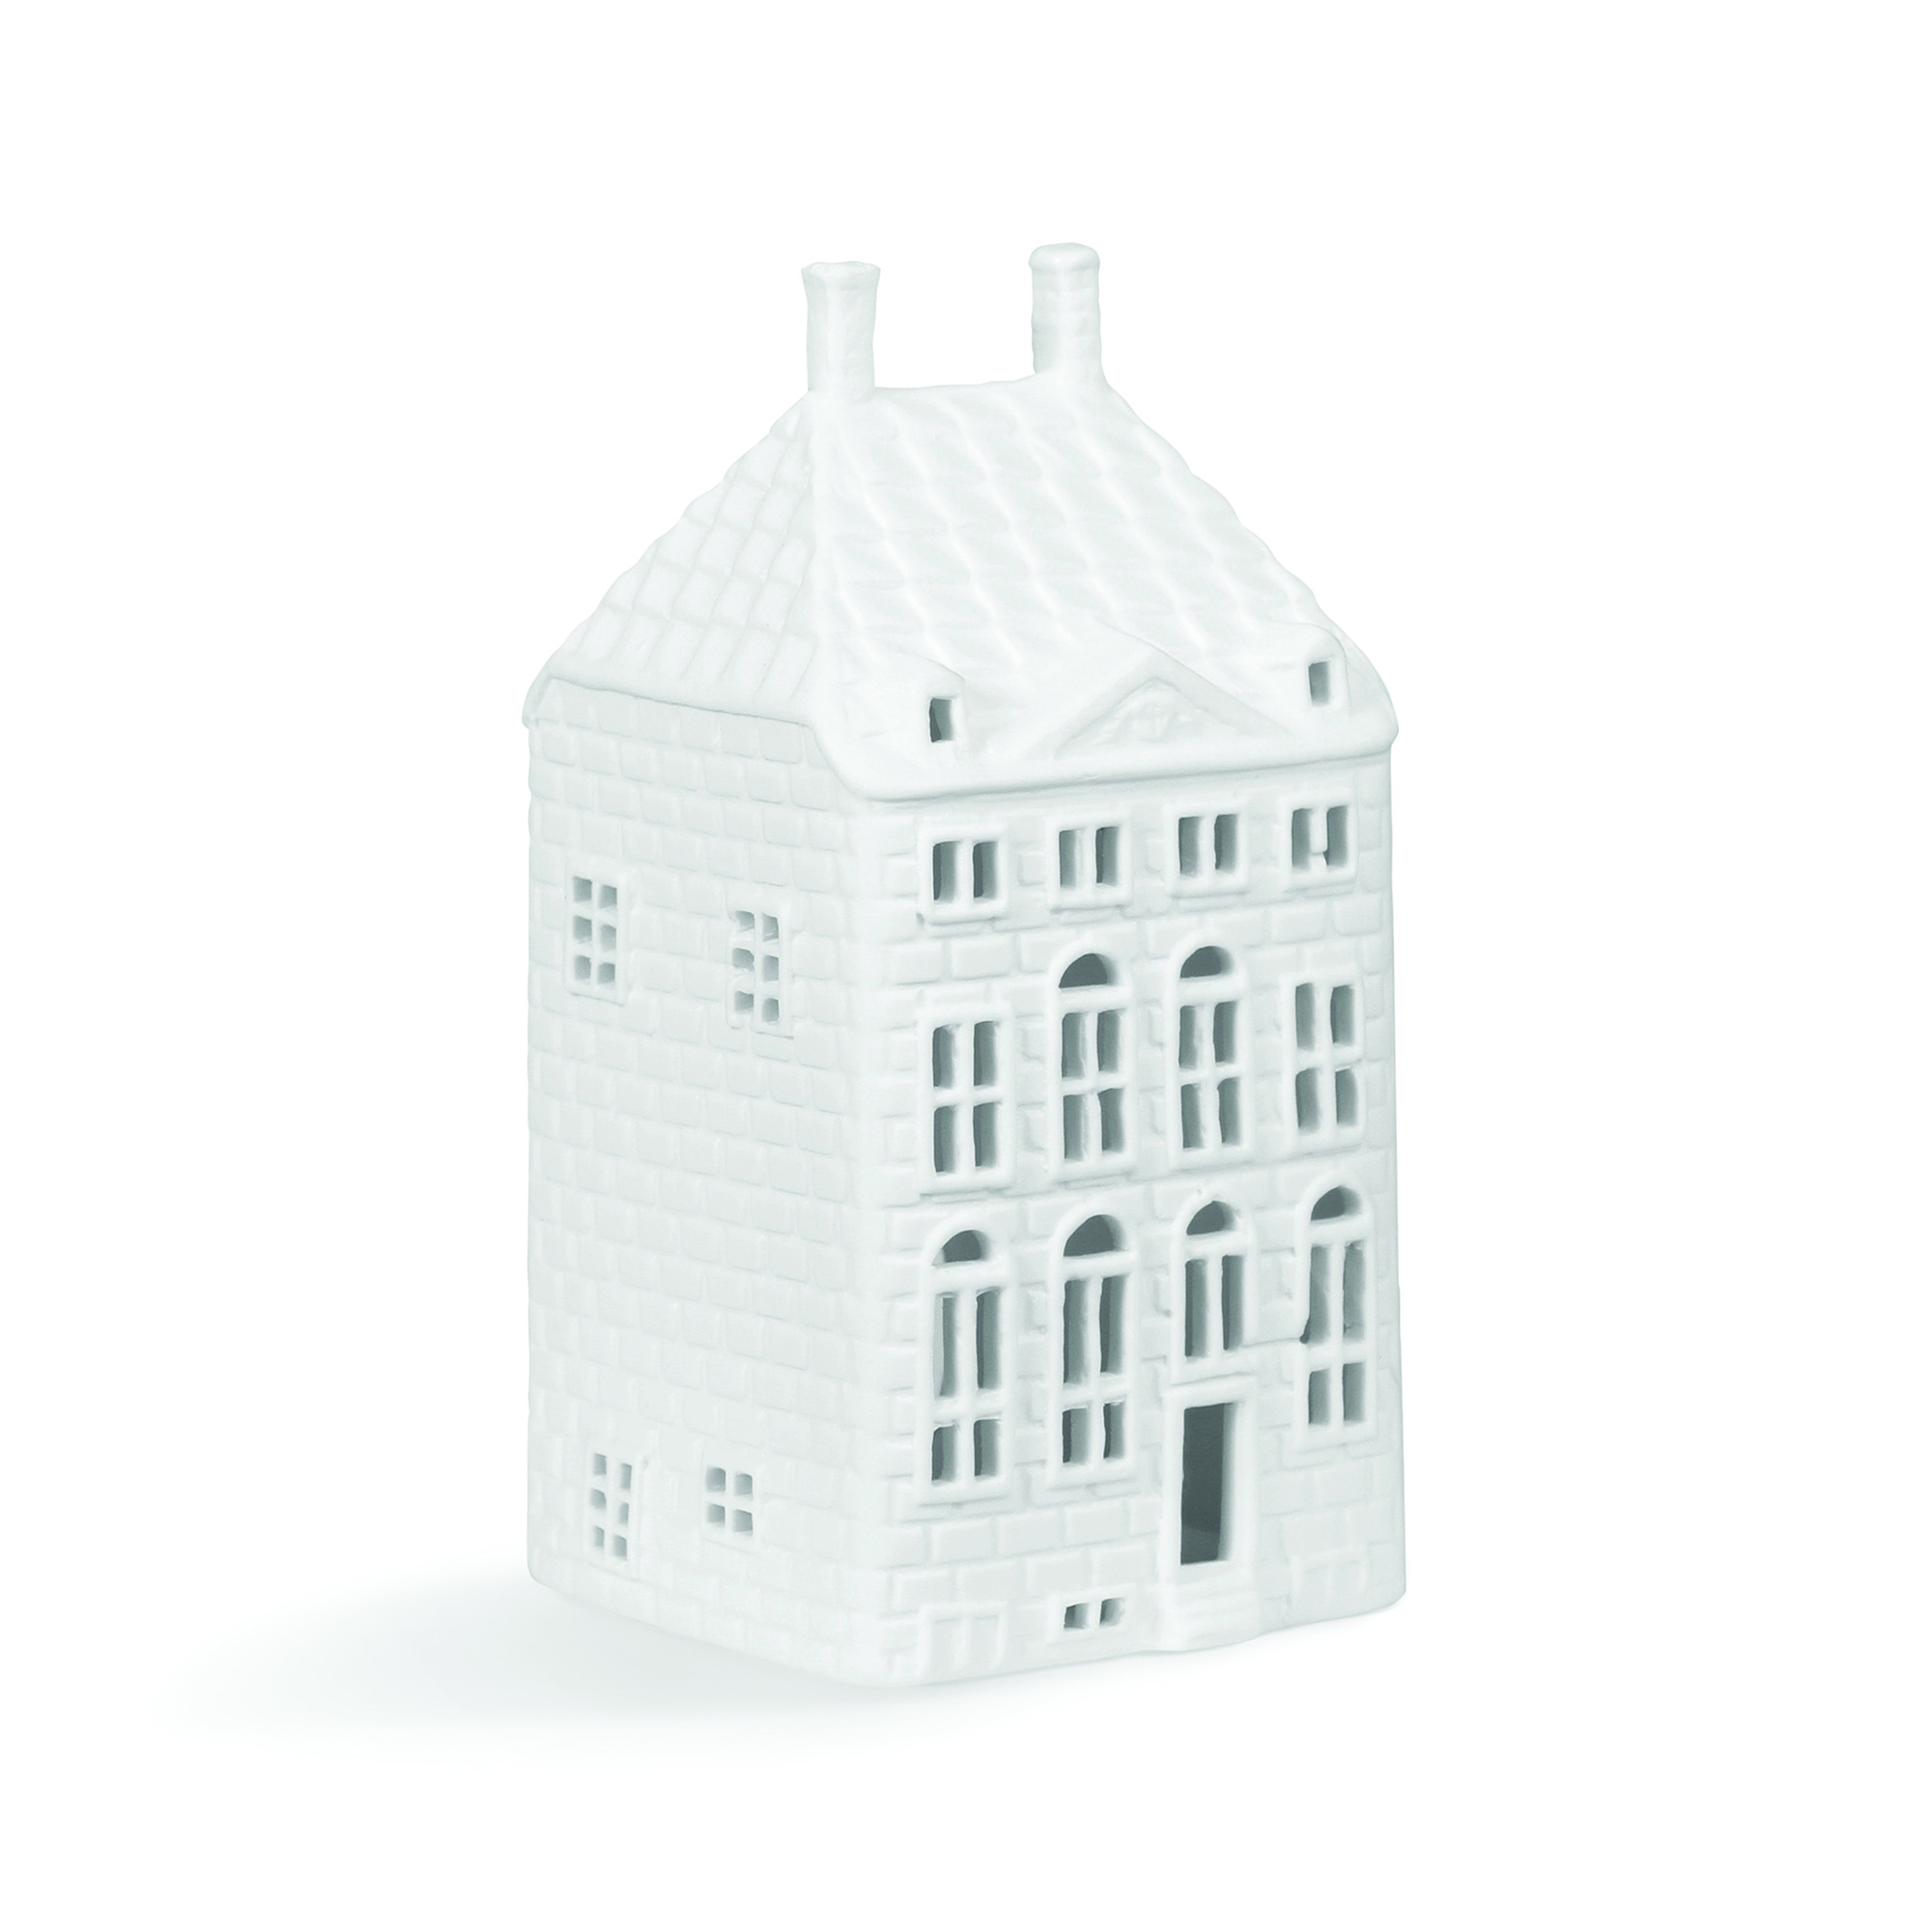 &klevering LARGE WHITE AMSTERDAM CANAL HOUSE TEALIGHT HOLDER | REMBRANDTHUIS